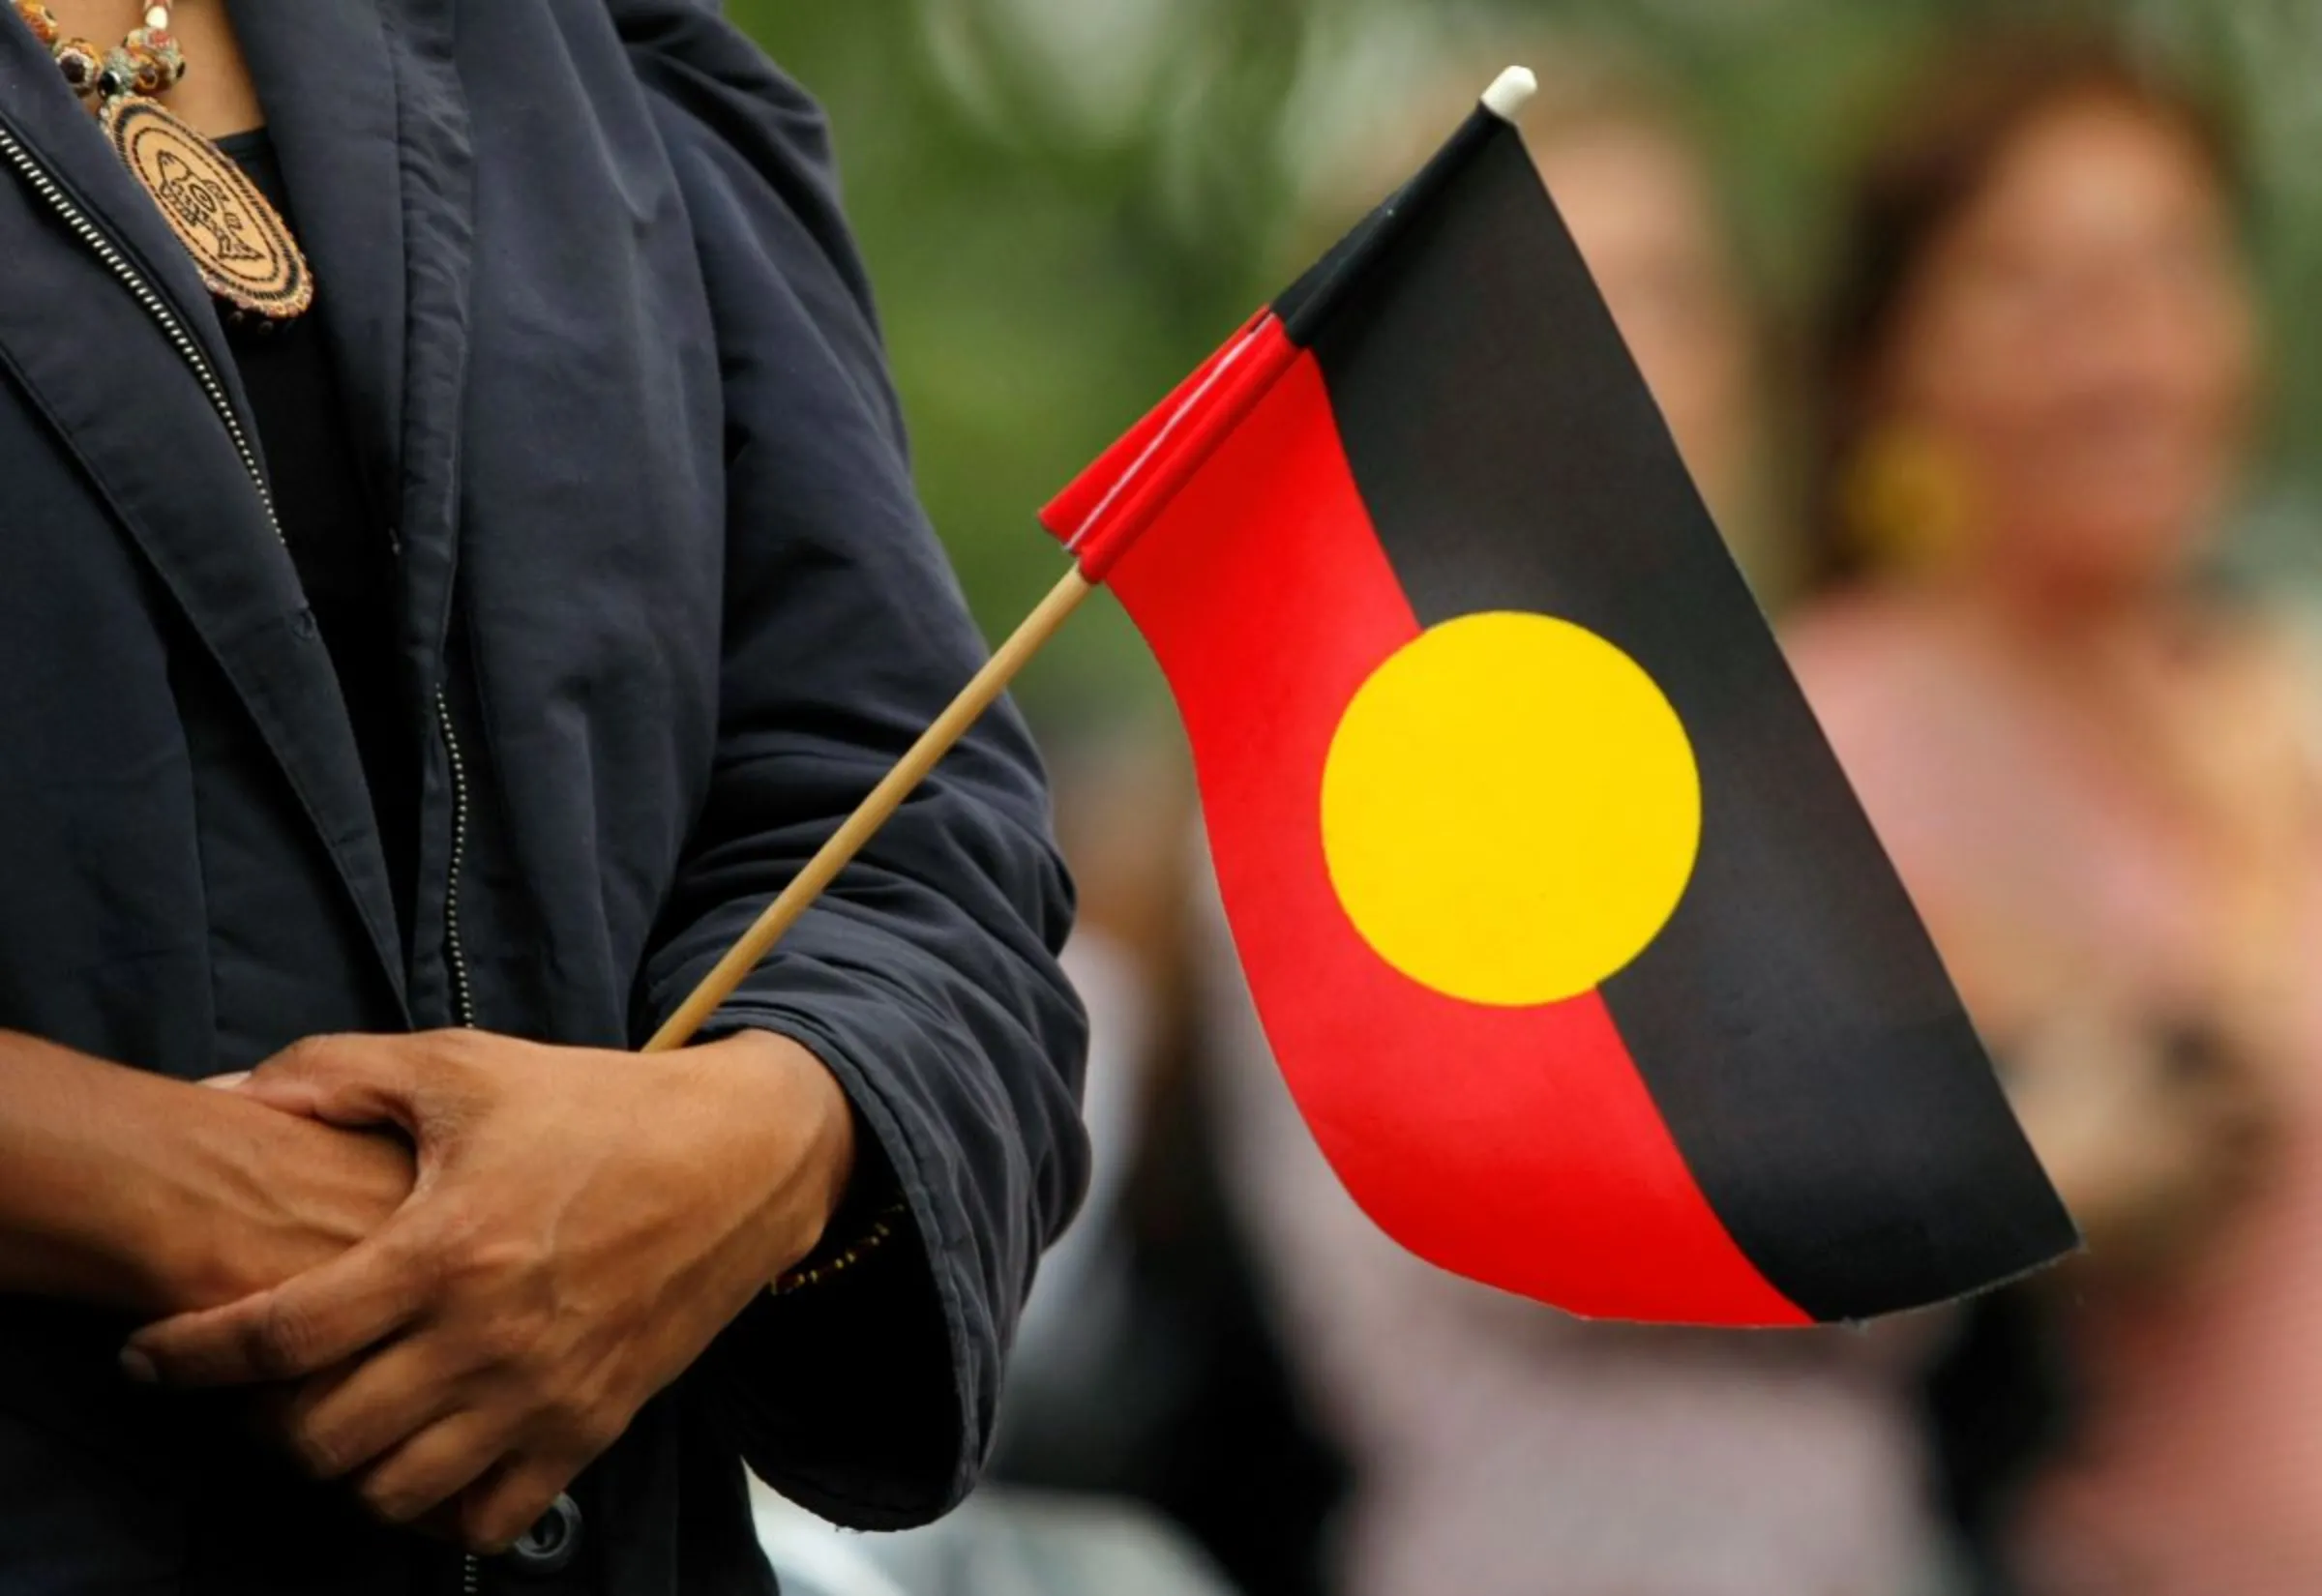 A woman holds an Aboriginal flag in the central Sydney suburb of Redfern, the heart of the nation's aboriginal rights movement. REUTERS/Tim Wimborne